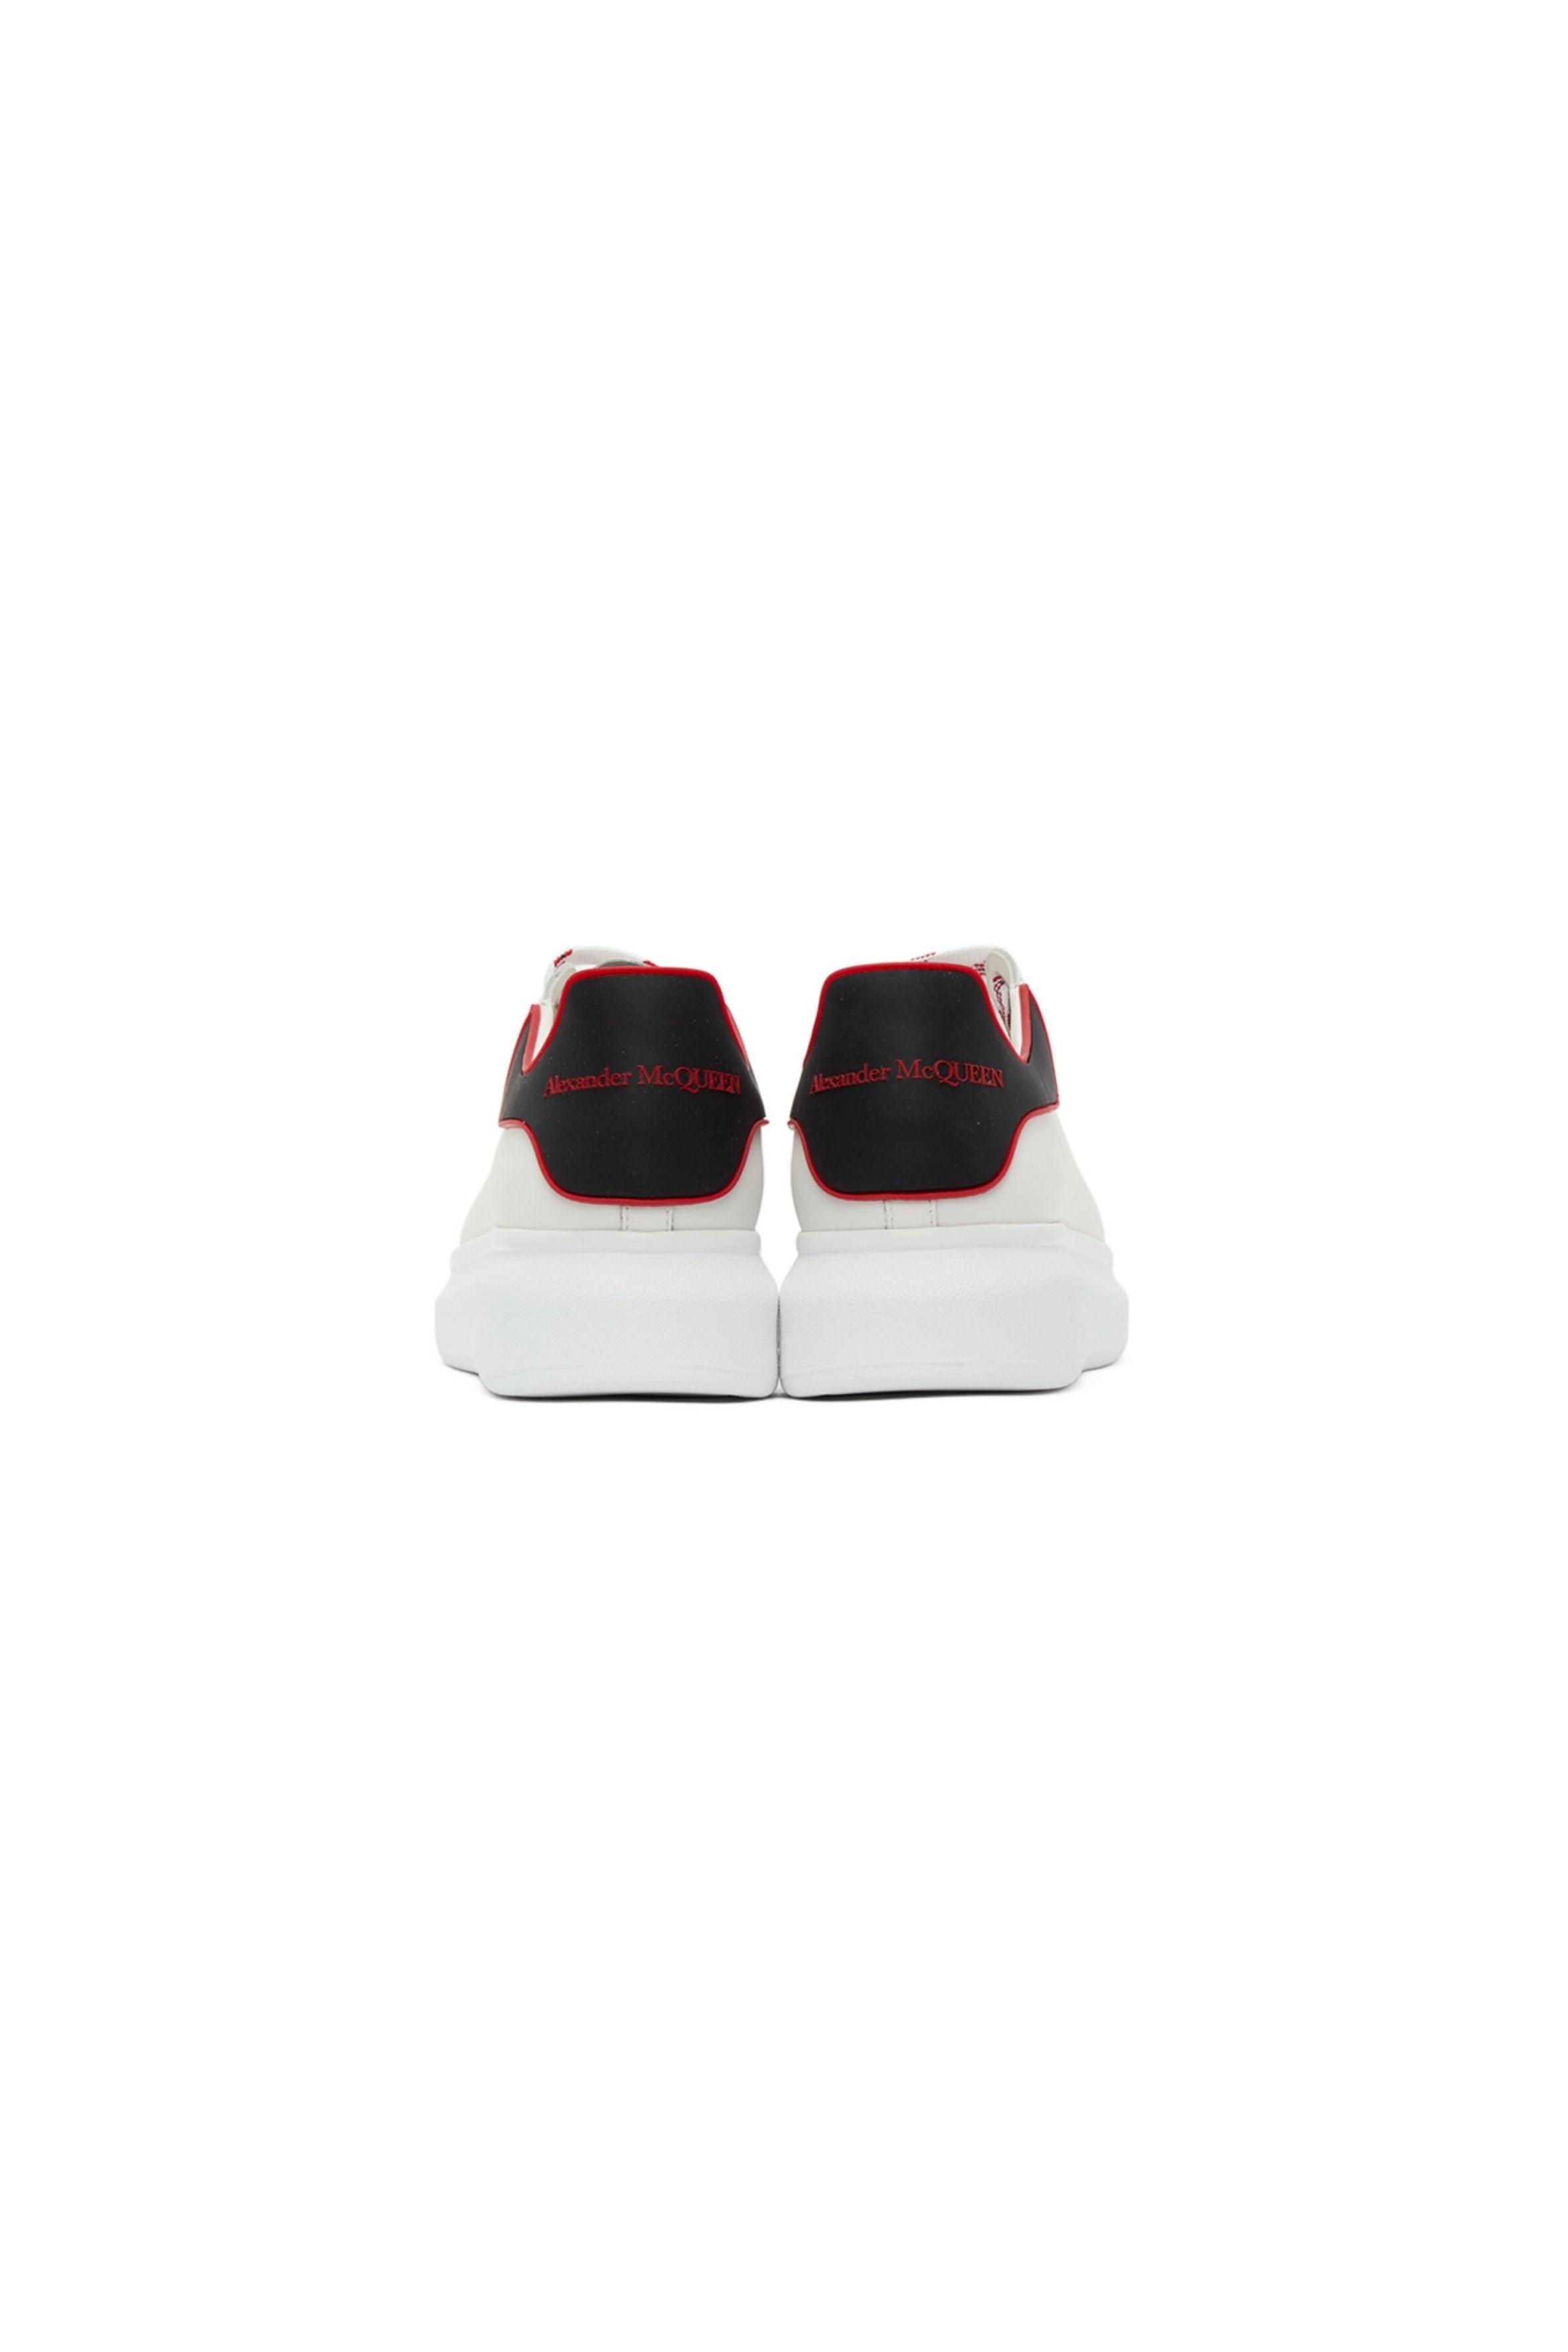 Alexander Mcqueens White & Red Oversized Sneakers